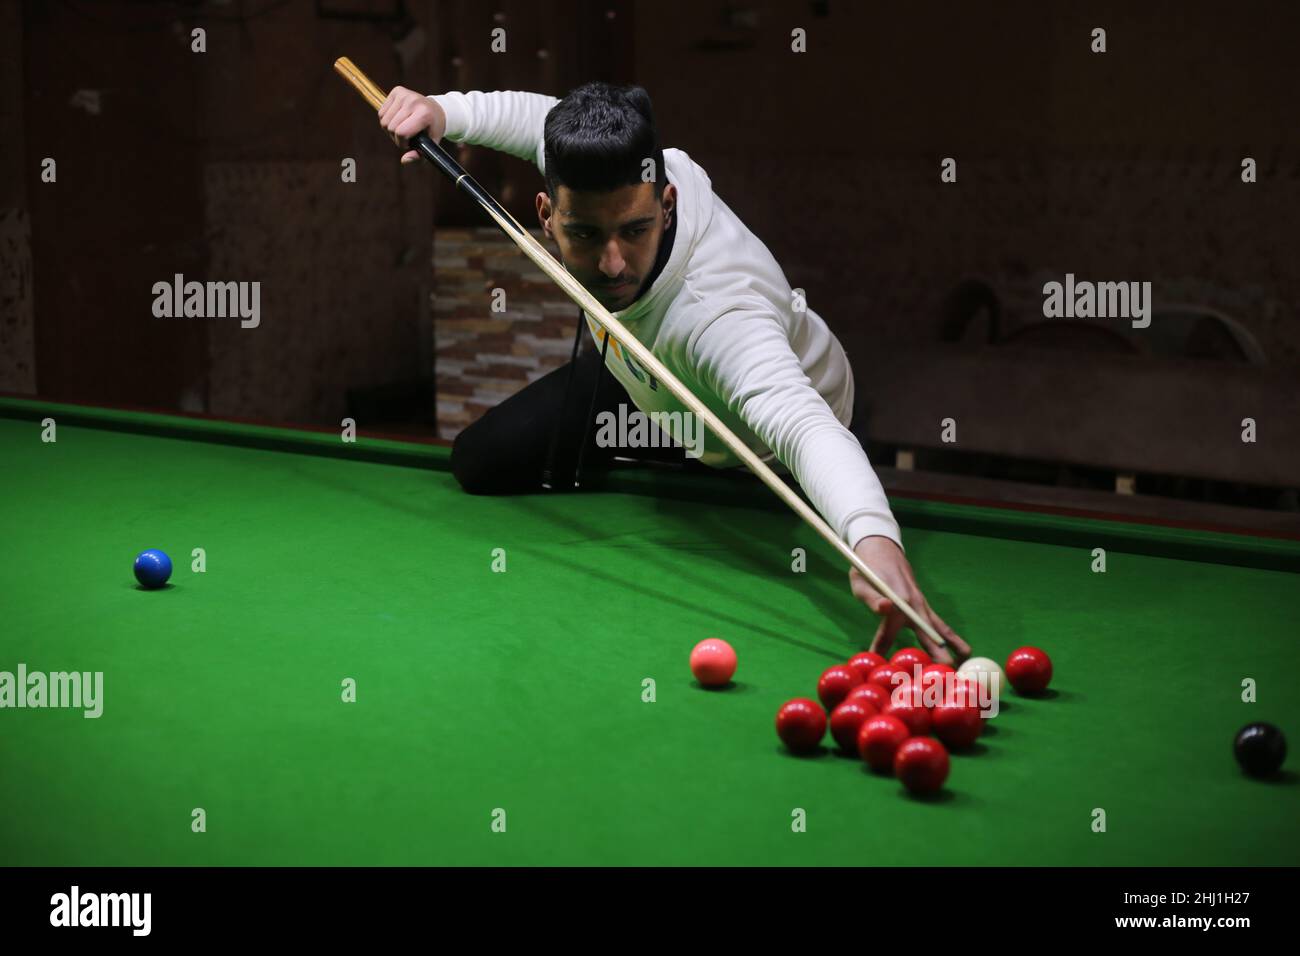 Gaza. 26th Jan, 2022. Palestinian young man Ahmed Nasr plays snooker inside a local sport club in the southern Gaza Strip city of Rafah, on Jan